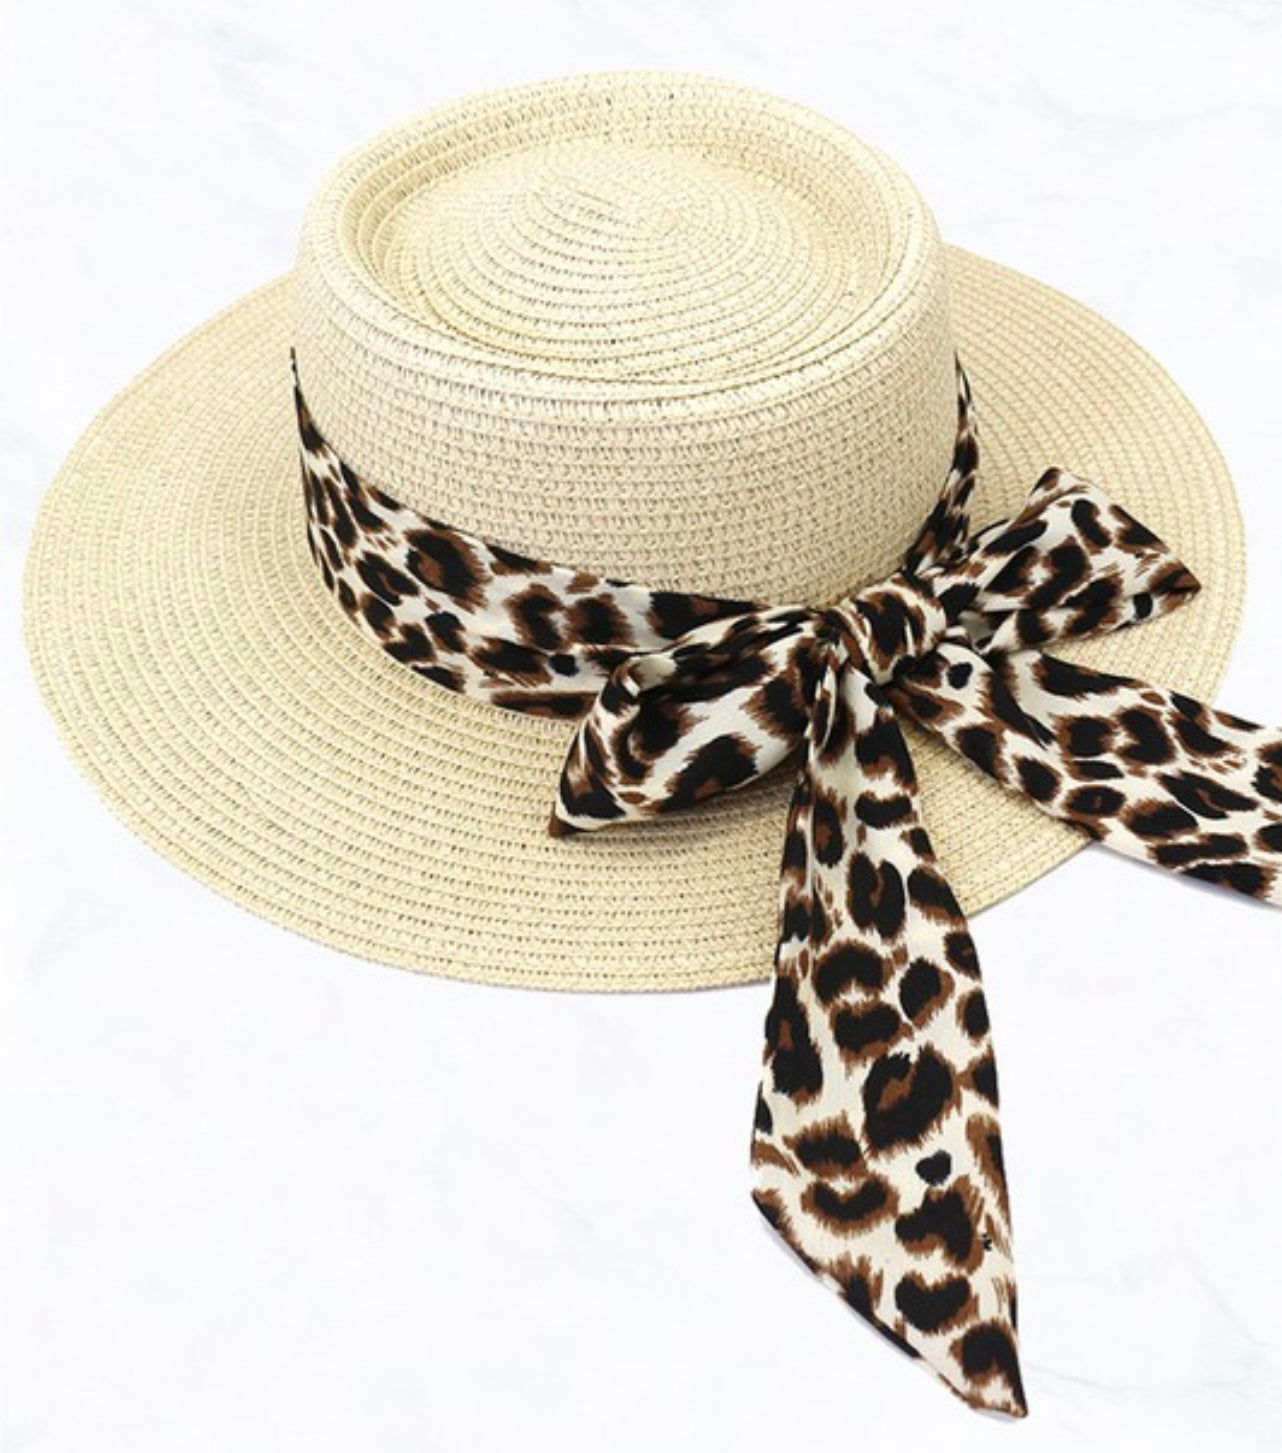 Straw hats with leopard tie